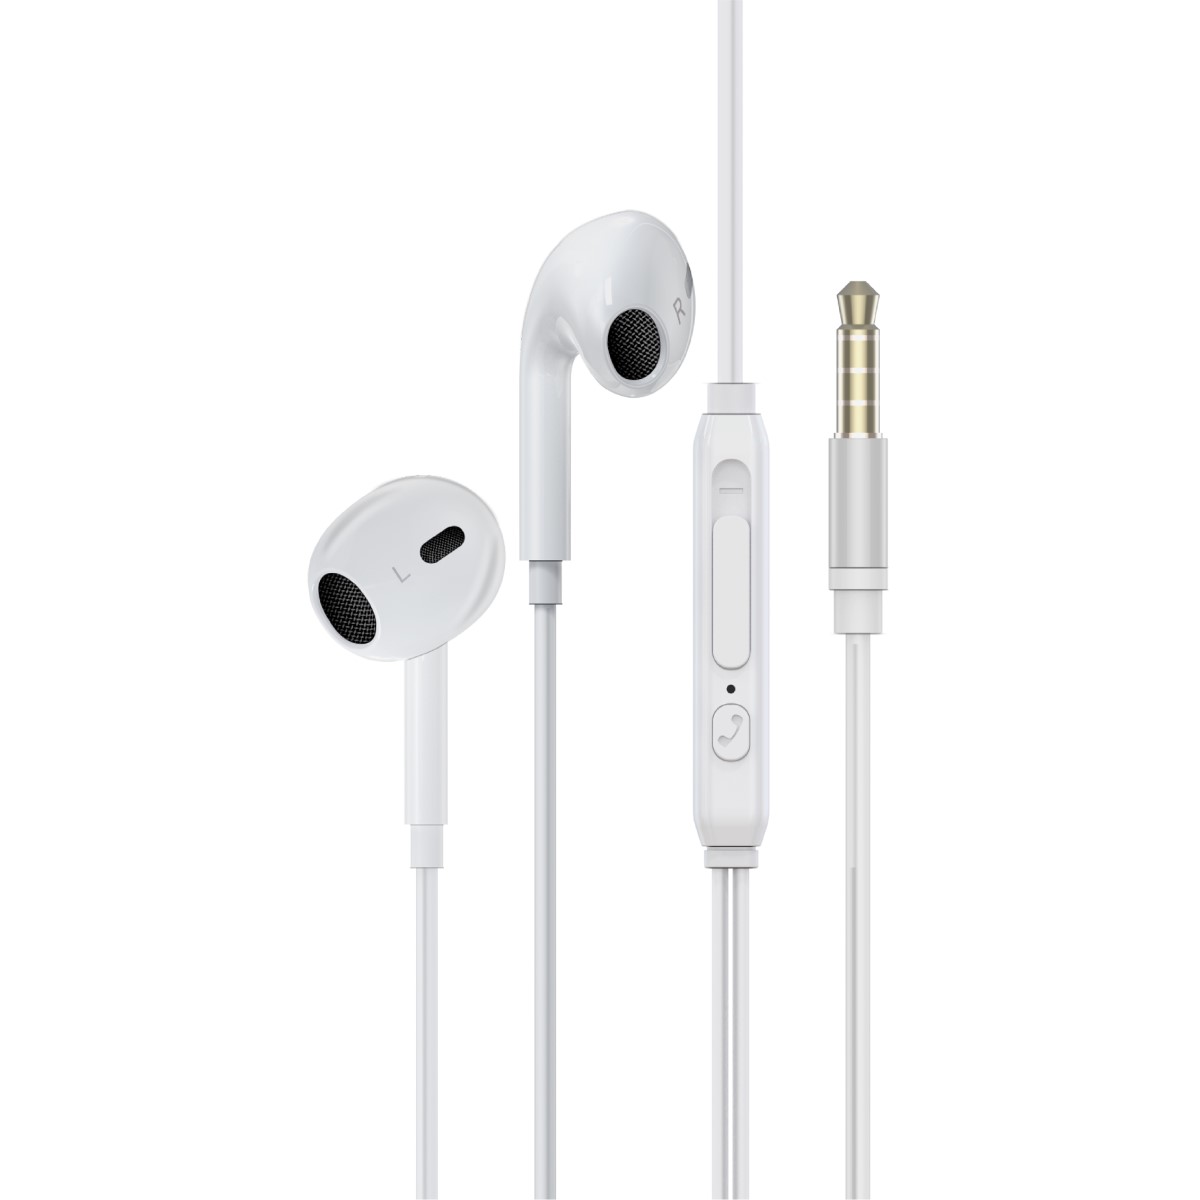 Promate Wired Earphones with Mic, Noise Isolation, Anti-Tangle Cable and Button Control, Phonic.White